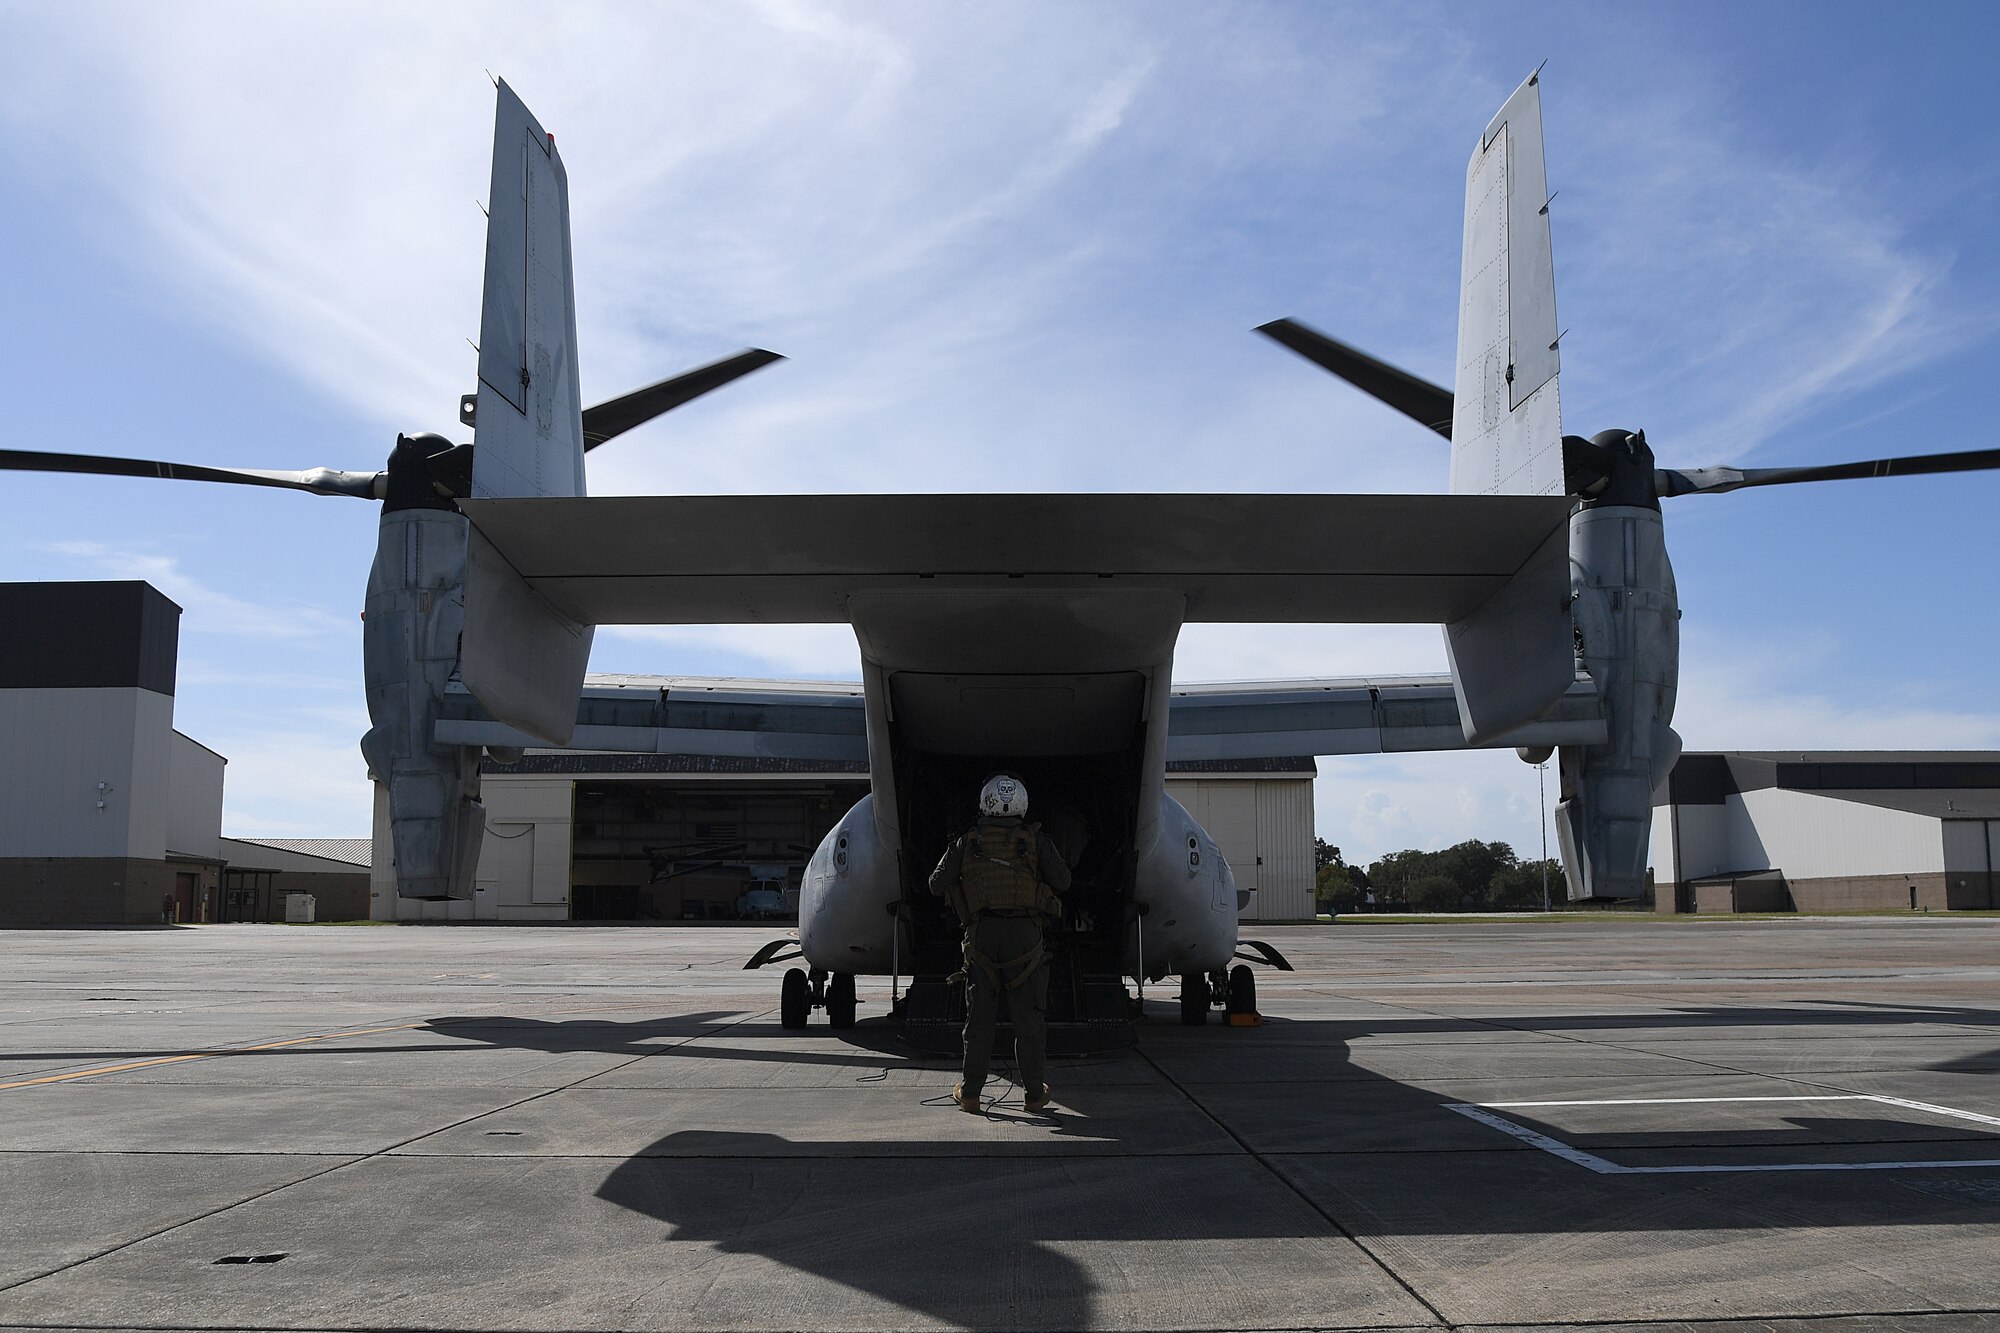 U.S. Marine Corps Staff Sgt. Jake Clark, Marine Medium Tiltrotor Squadron 774 MV-22B Osprey crew chief, Naval Air Station Norfolk, Virginia, performs a pre-flight inspection at Keesler Air Force Base, Mississippi, Oct. 23, 2020. Marines came to Keesler to conduct routine training operations in and around the Mississippi area. (U.S. Air Force photo by Senior Airman Suzie Plotnikov)